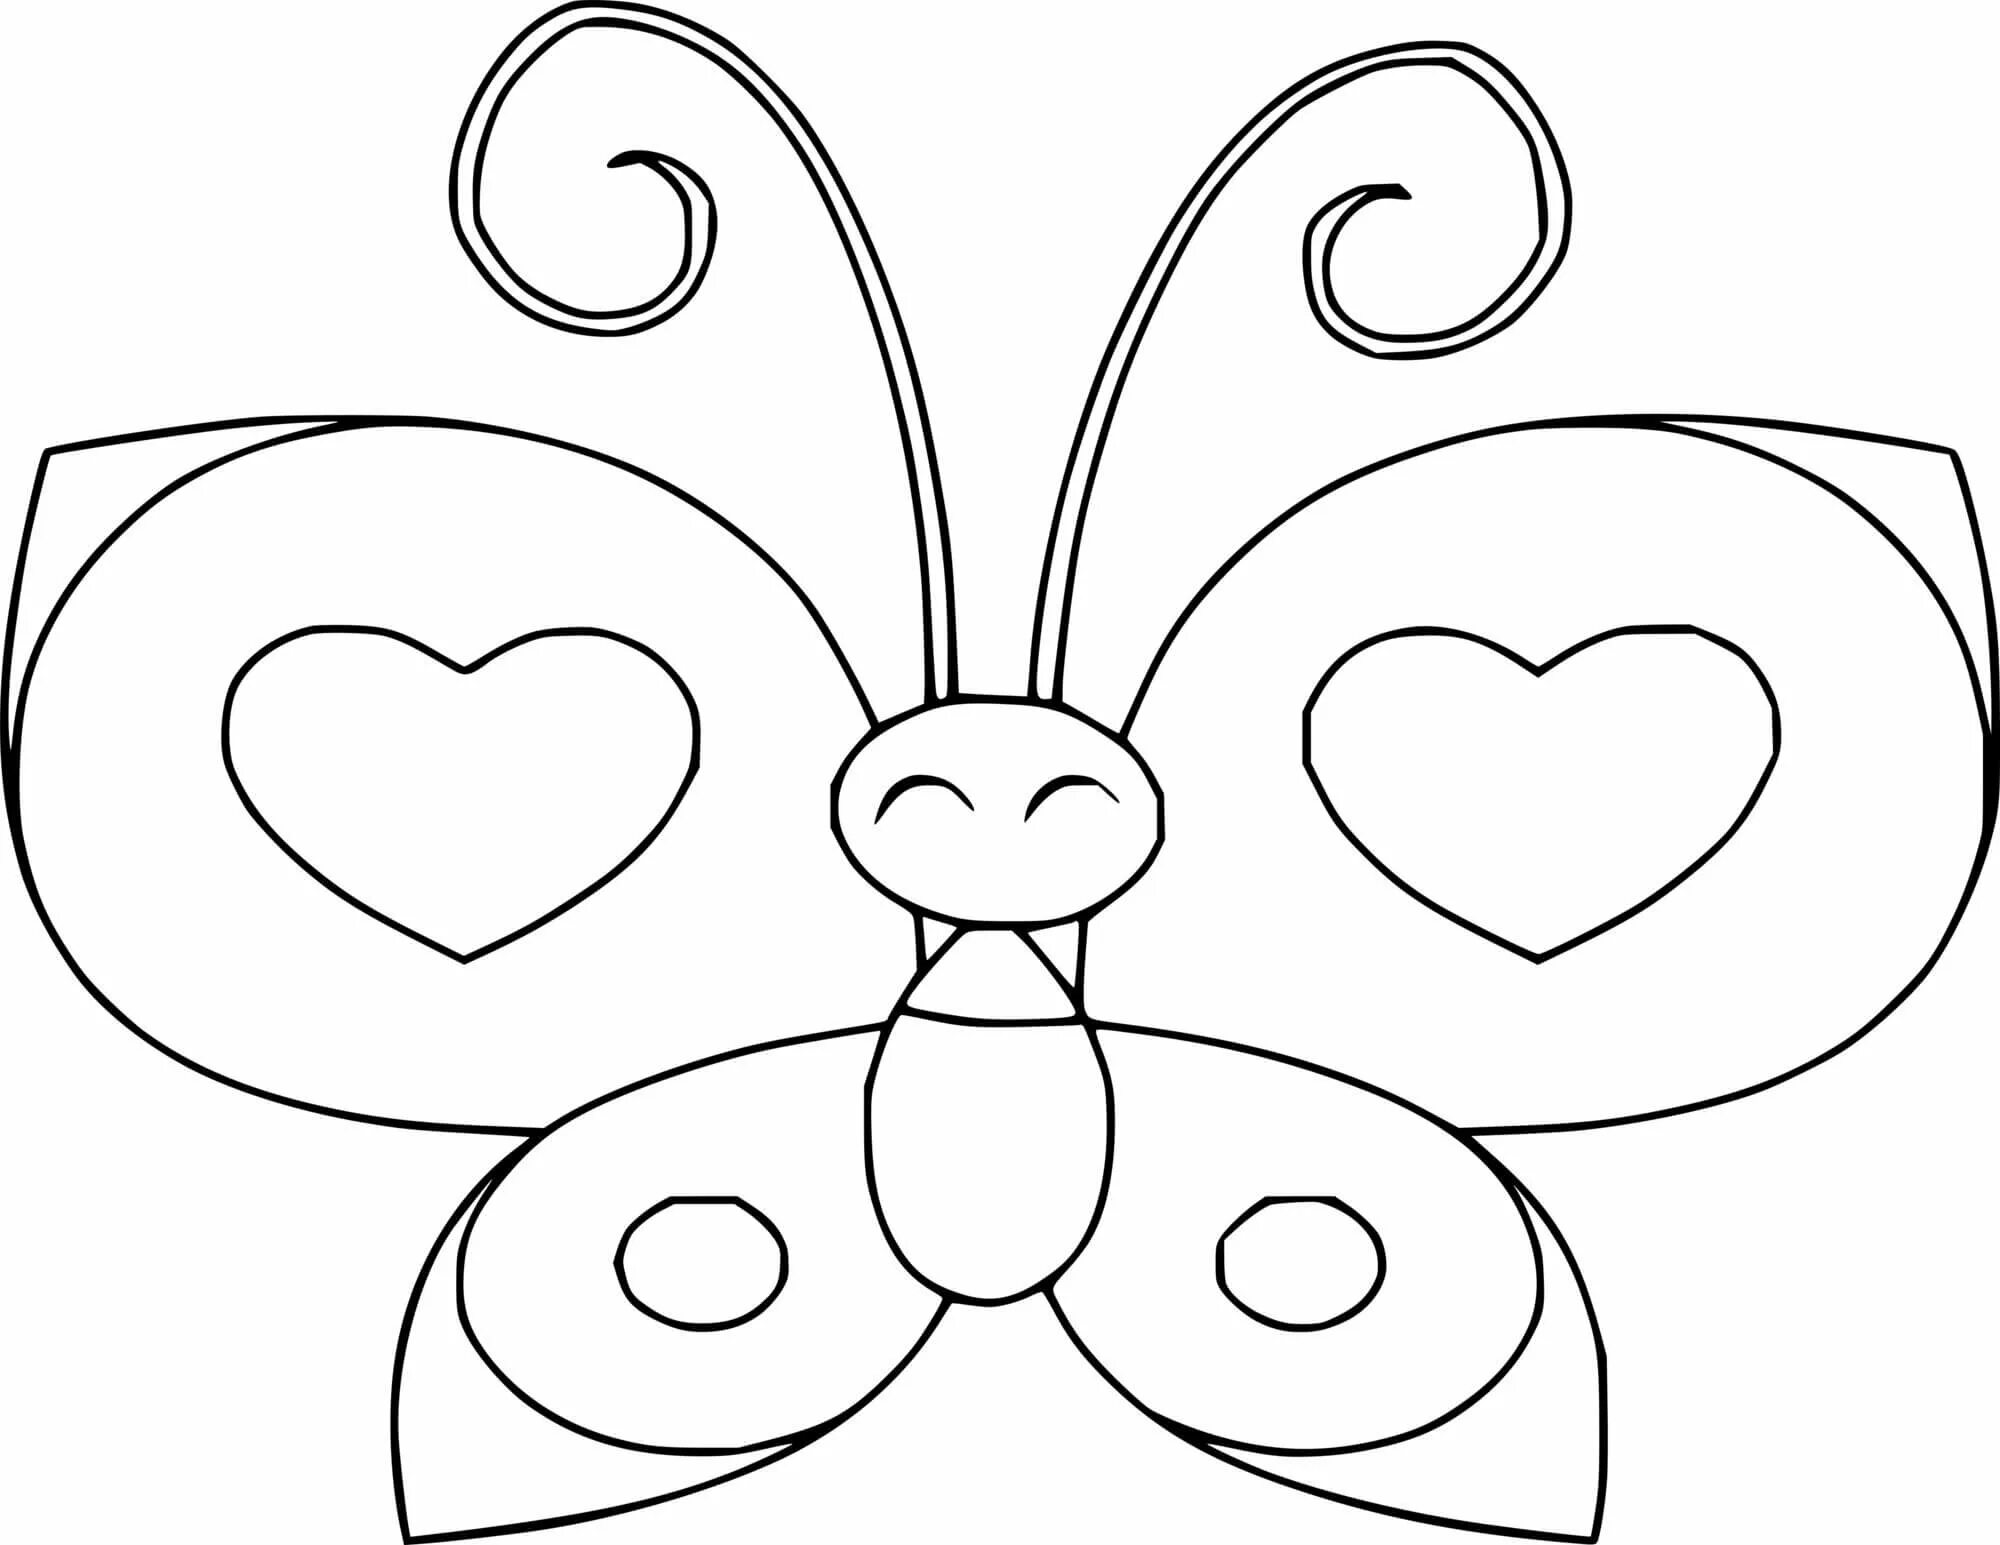 Beautifully colored butterflies coloring page